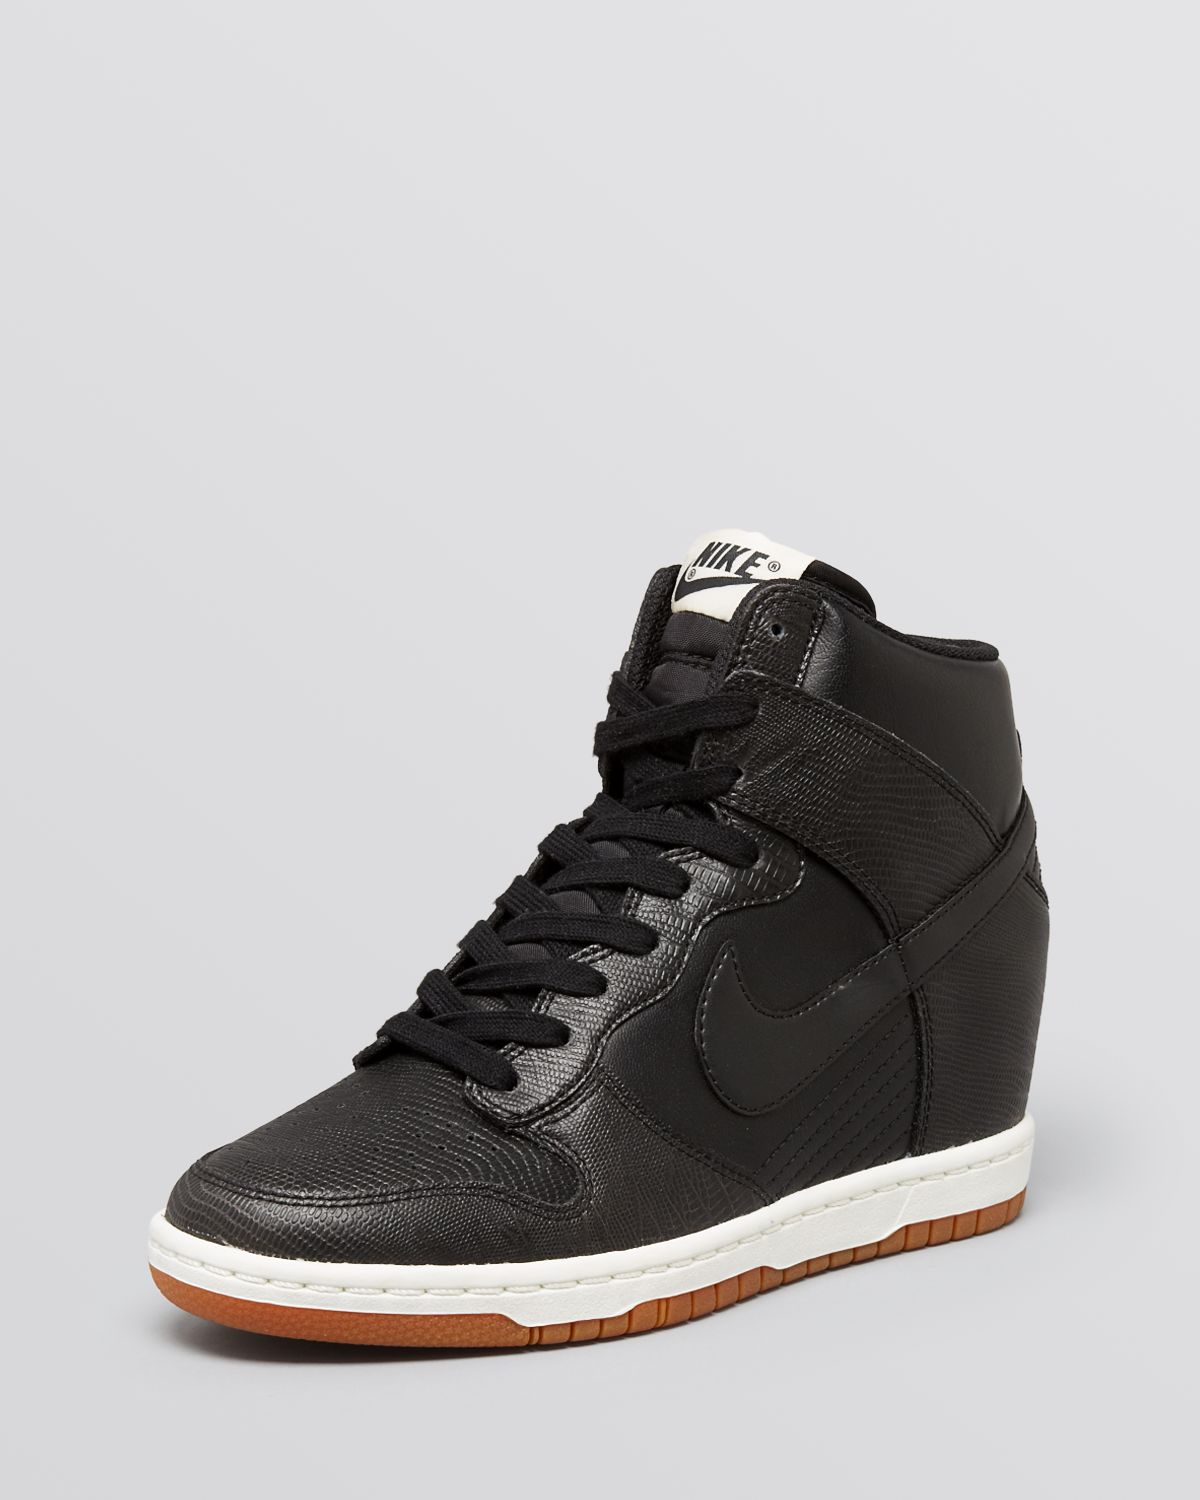 Lyst - Nike Lace Up High Top Wedge Sneakers - Womens Dunk -8389